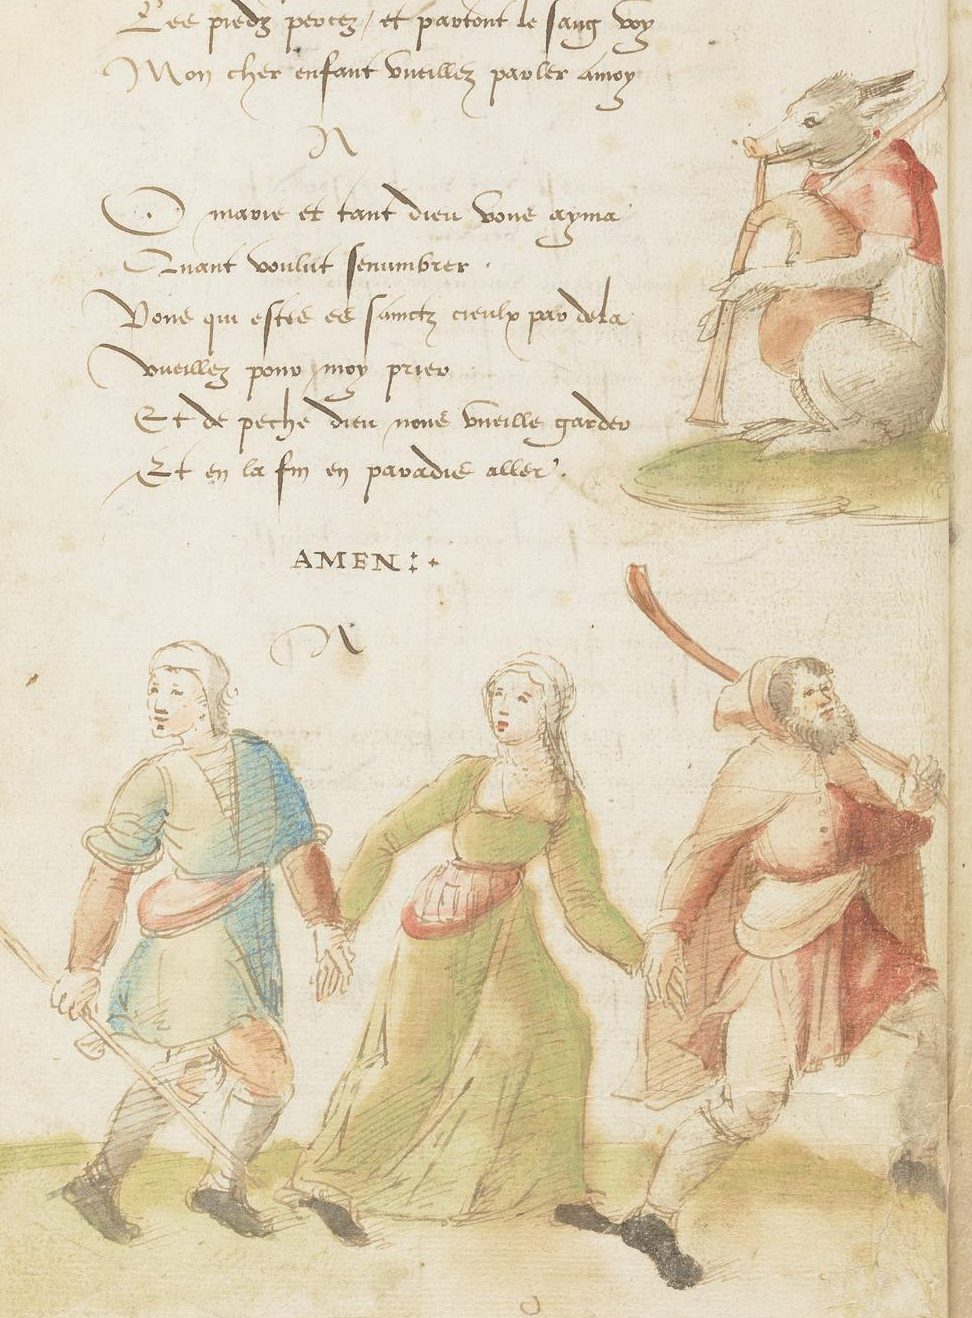 A medieval carol. Carols dance around a selection of text